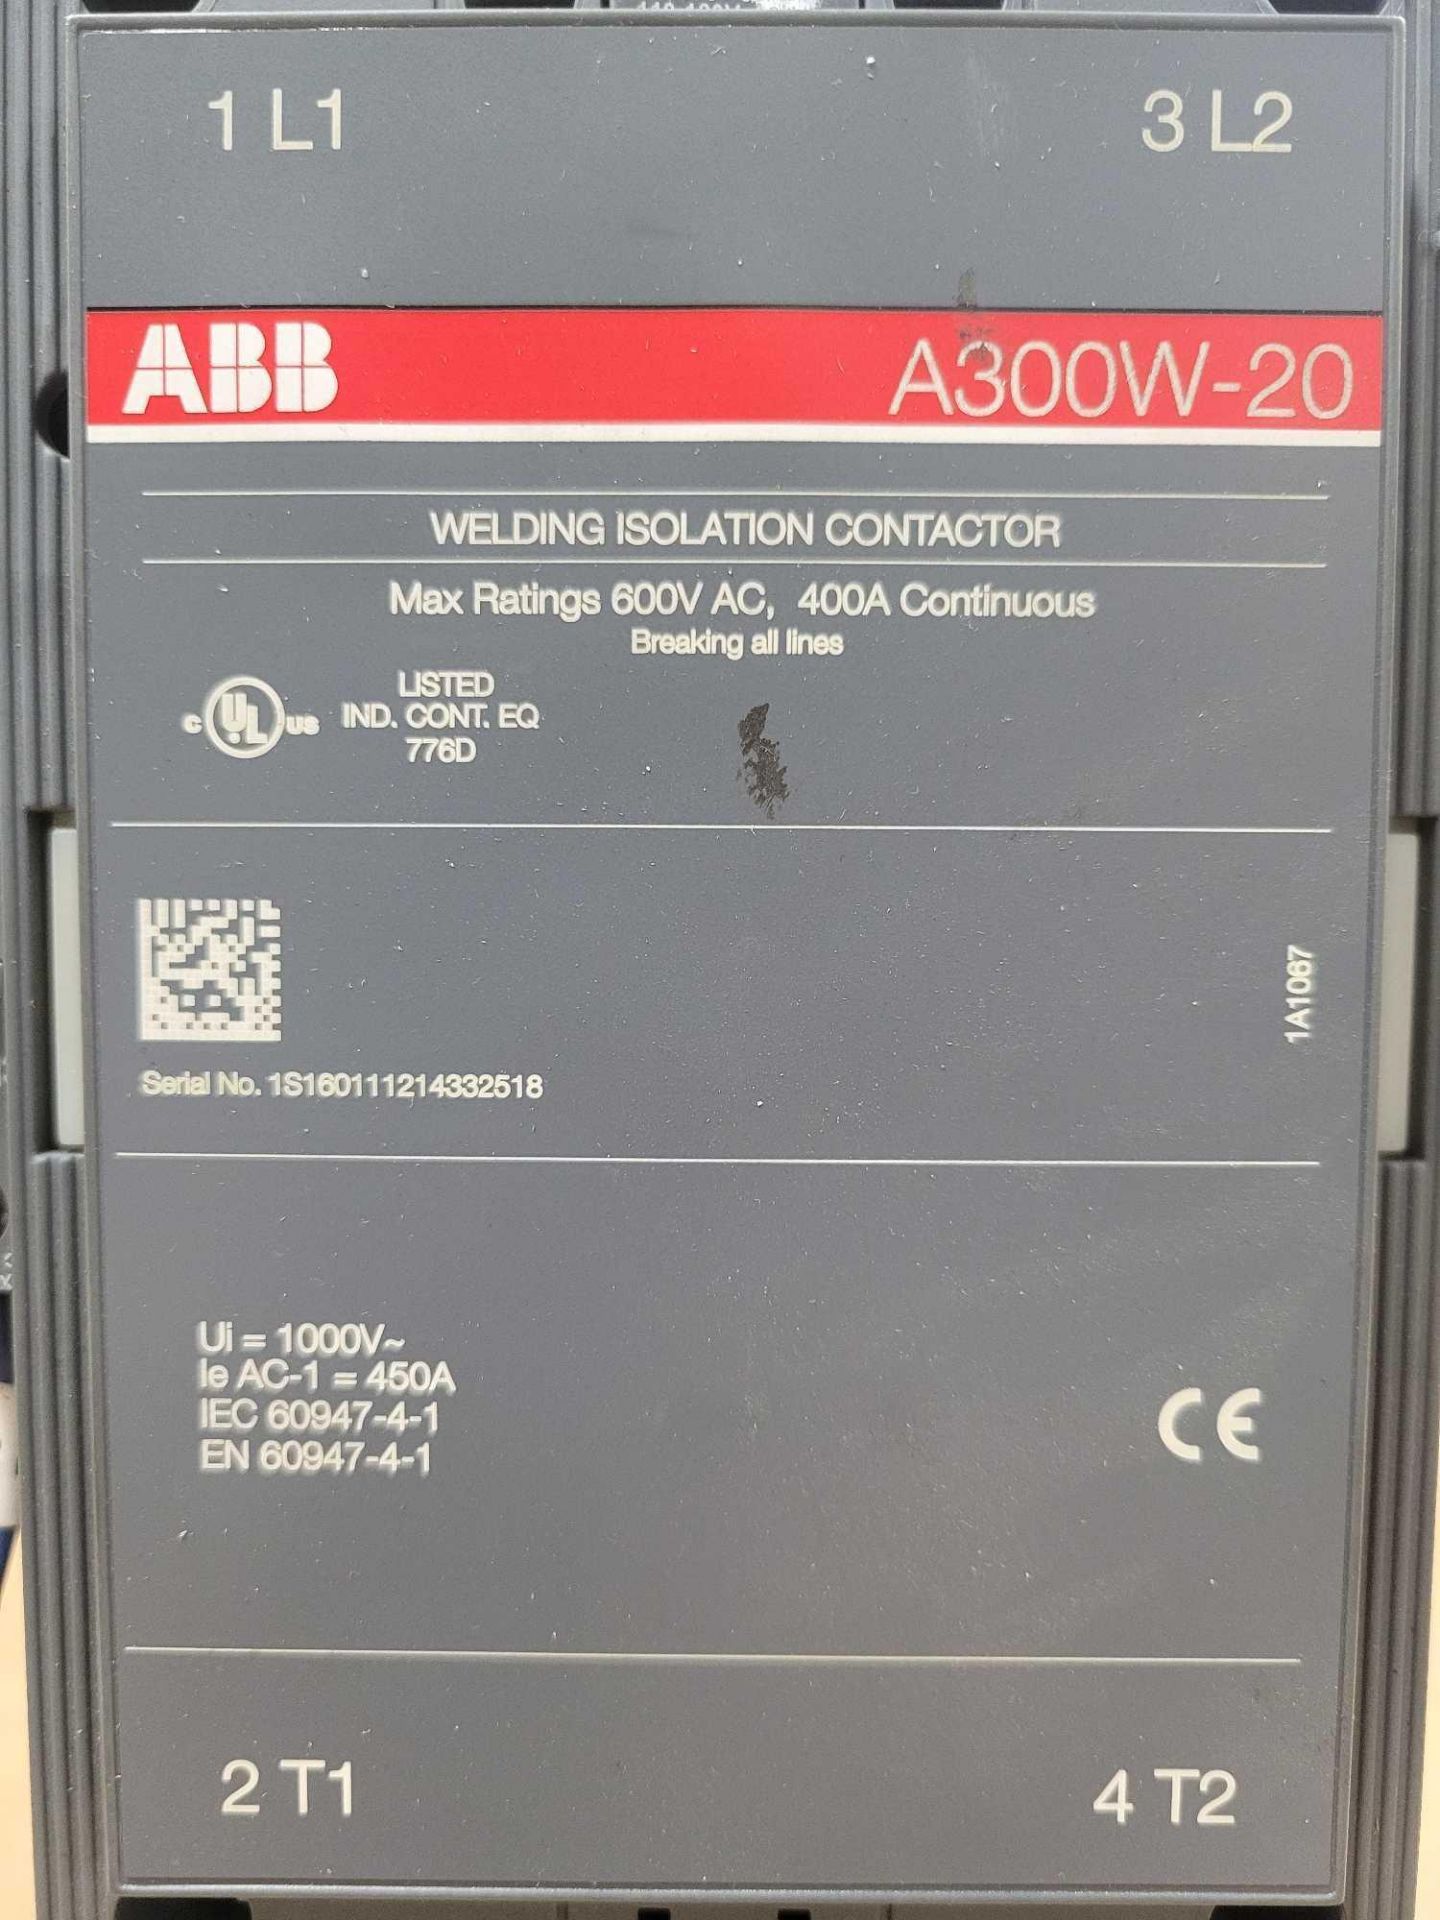 ABB A300W-20 / Welding Isolation Contactor  /  Lot Weight: 14.0 lbs - Image 2 of 7